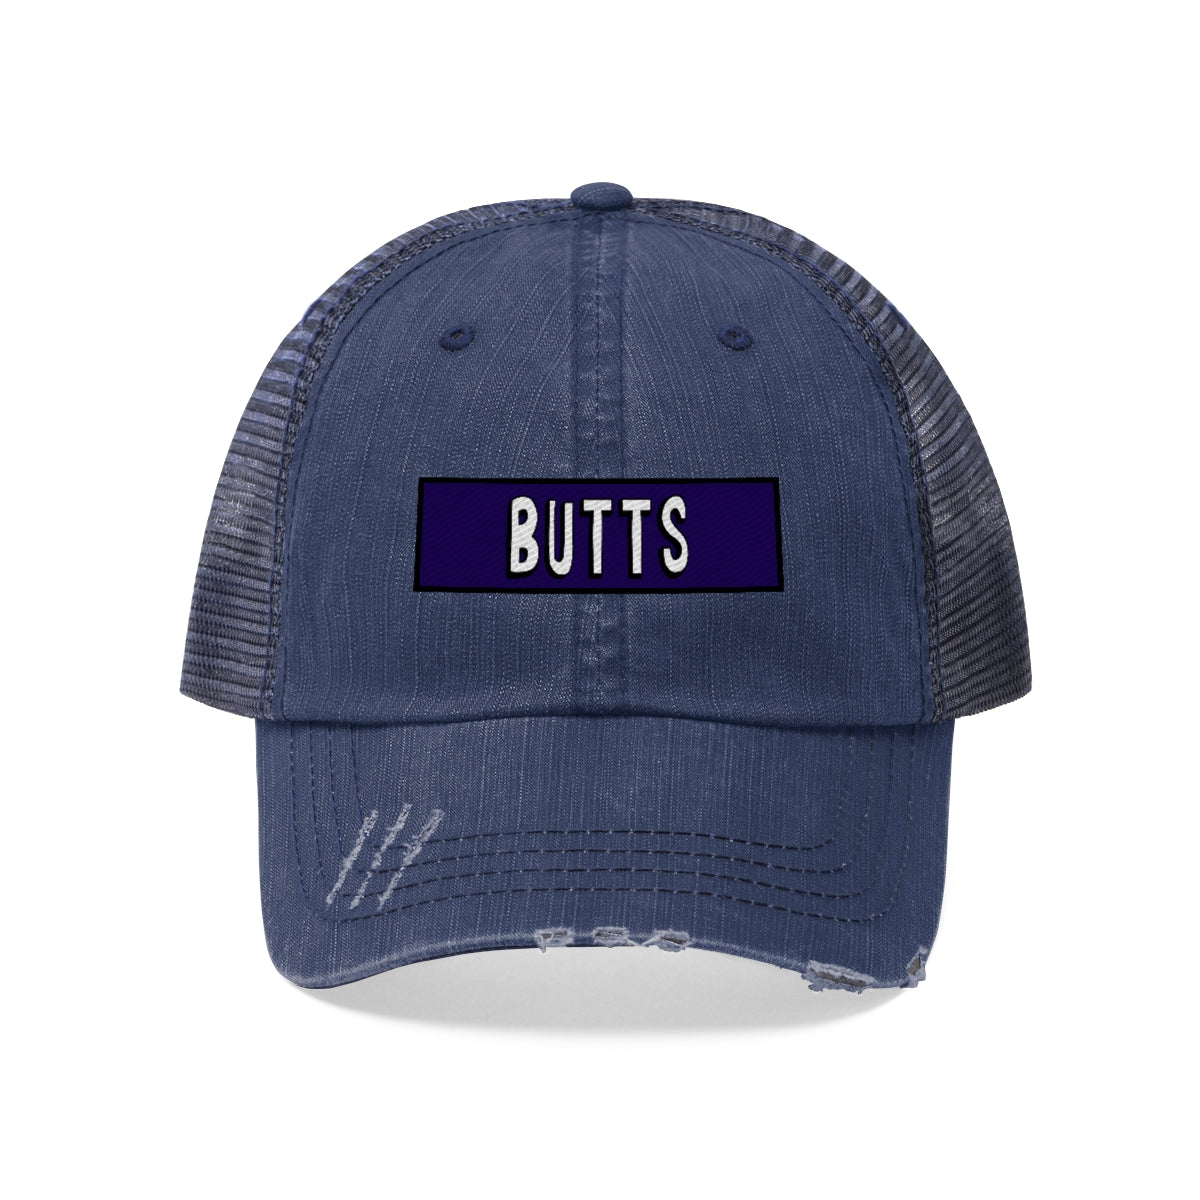 Butts Embroidered Trucker Hat - Just Like Bob Bob's Burgers